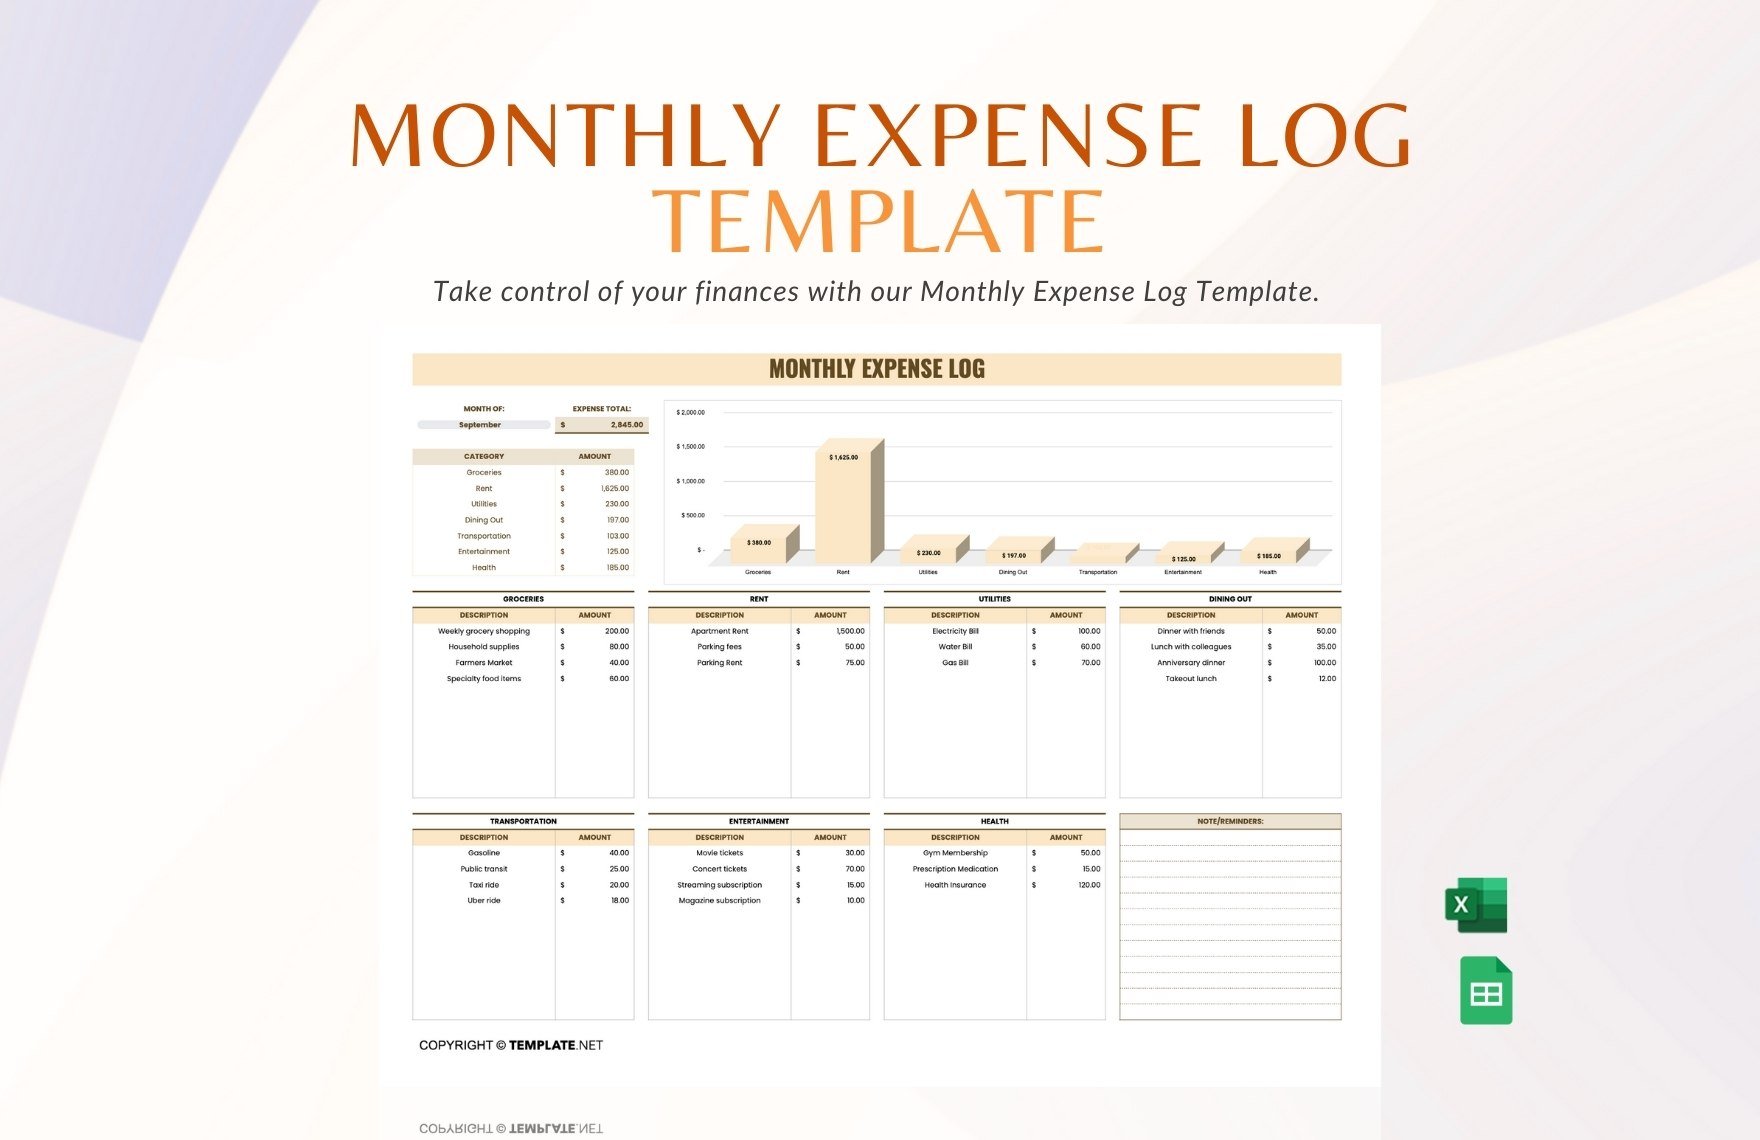 Free Monthly Expense Log Template in Excel, Google Sheets